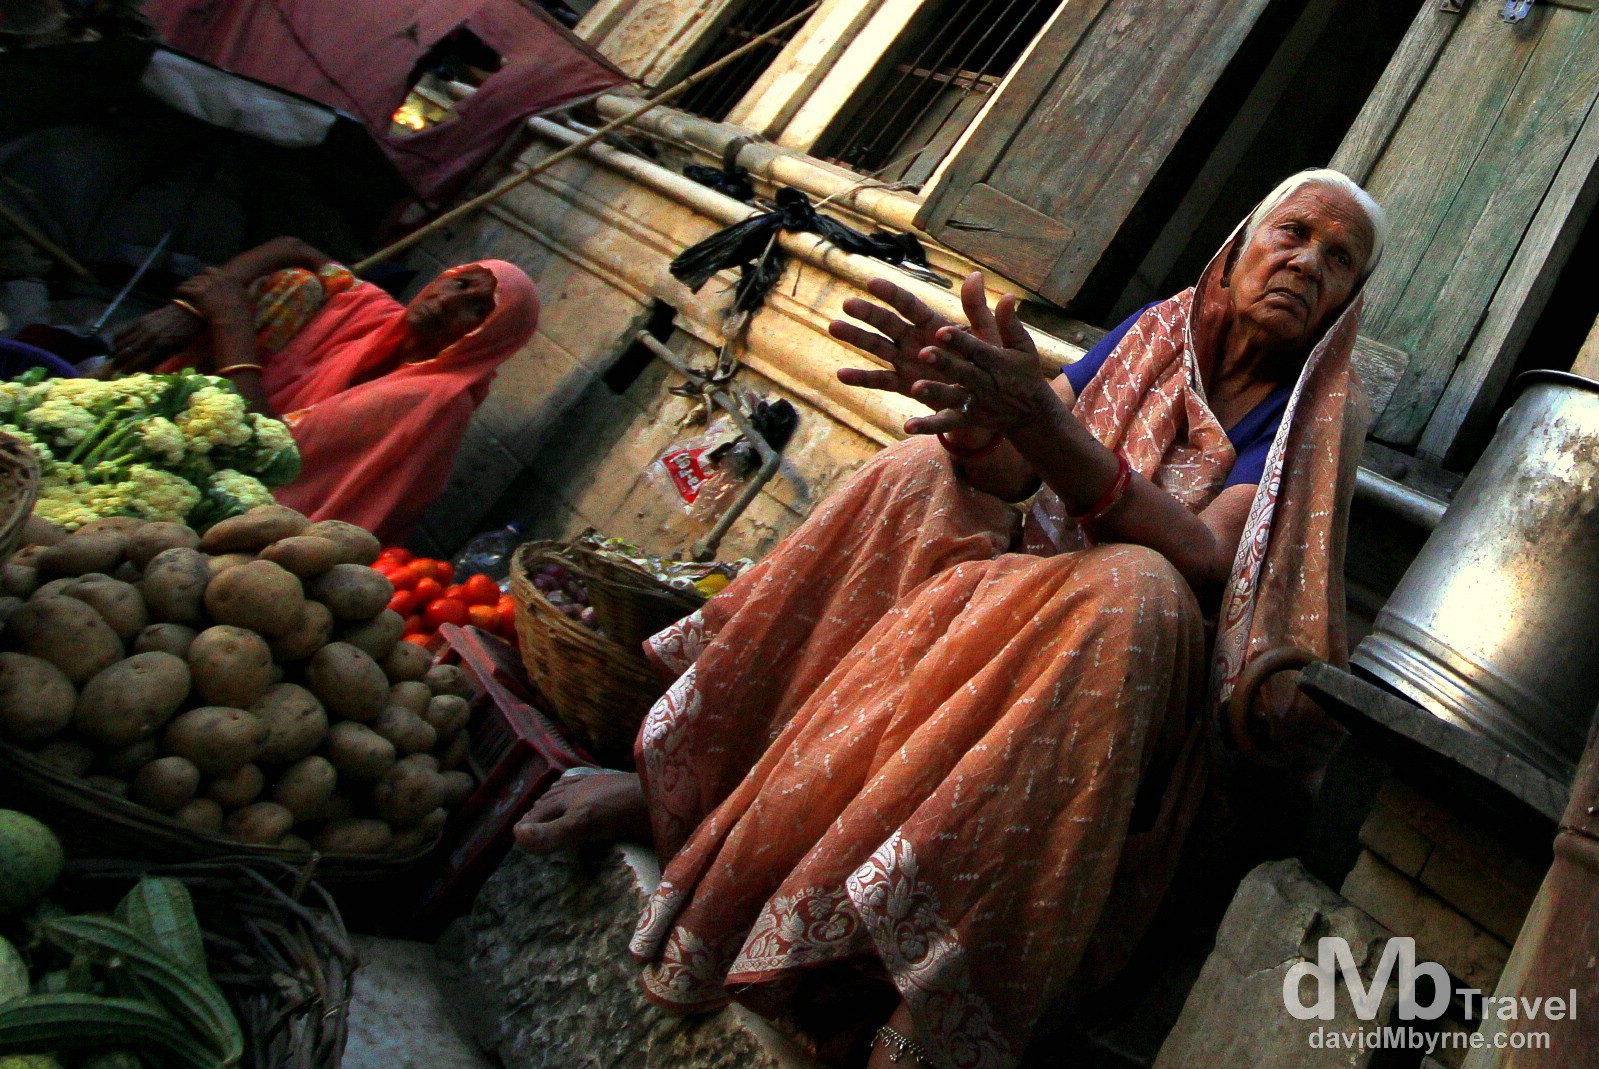 In a market on the streets of Pushkar, Rajasthan, India. October 3rd 2012.